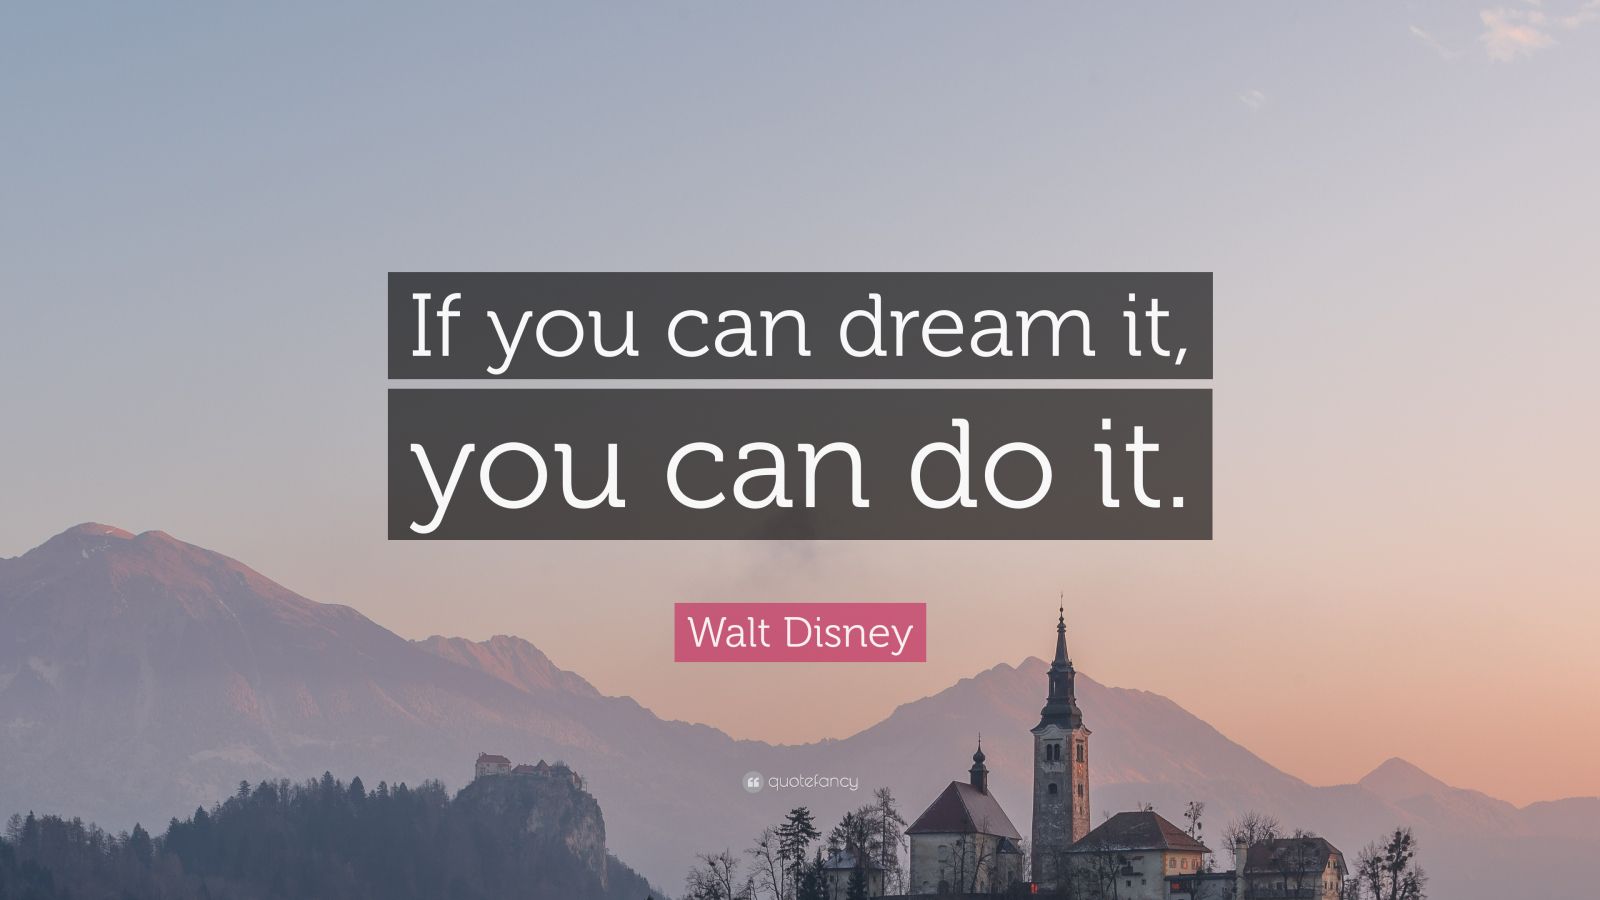 Walt Disney Quote: “If you can dream it, you can do it.” (28 wallpapers